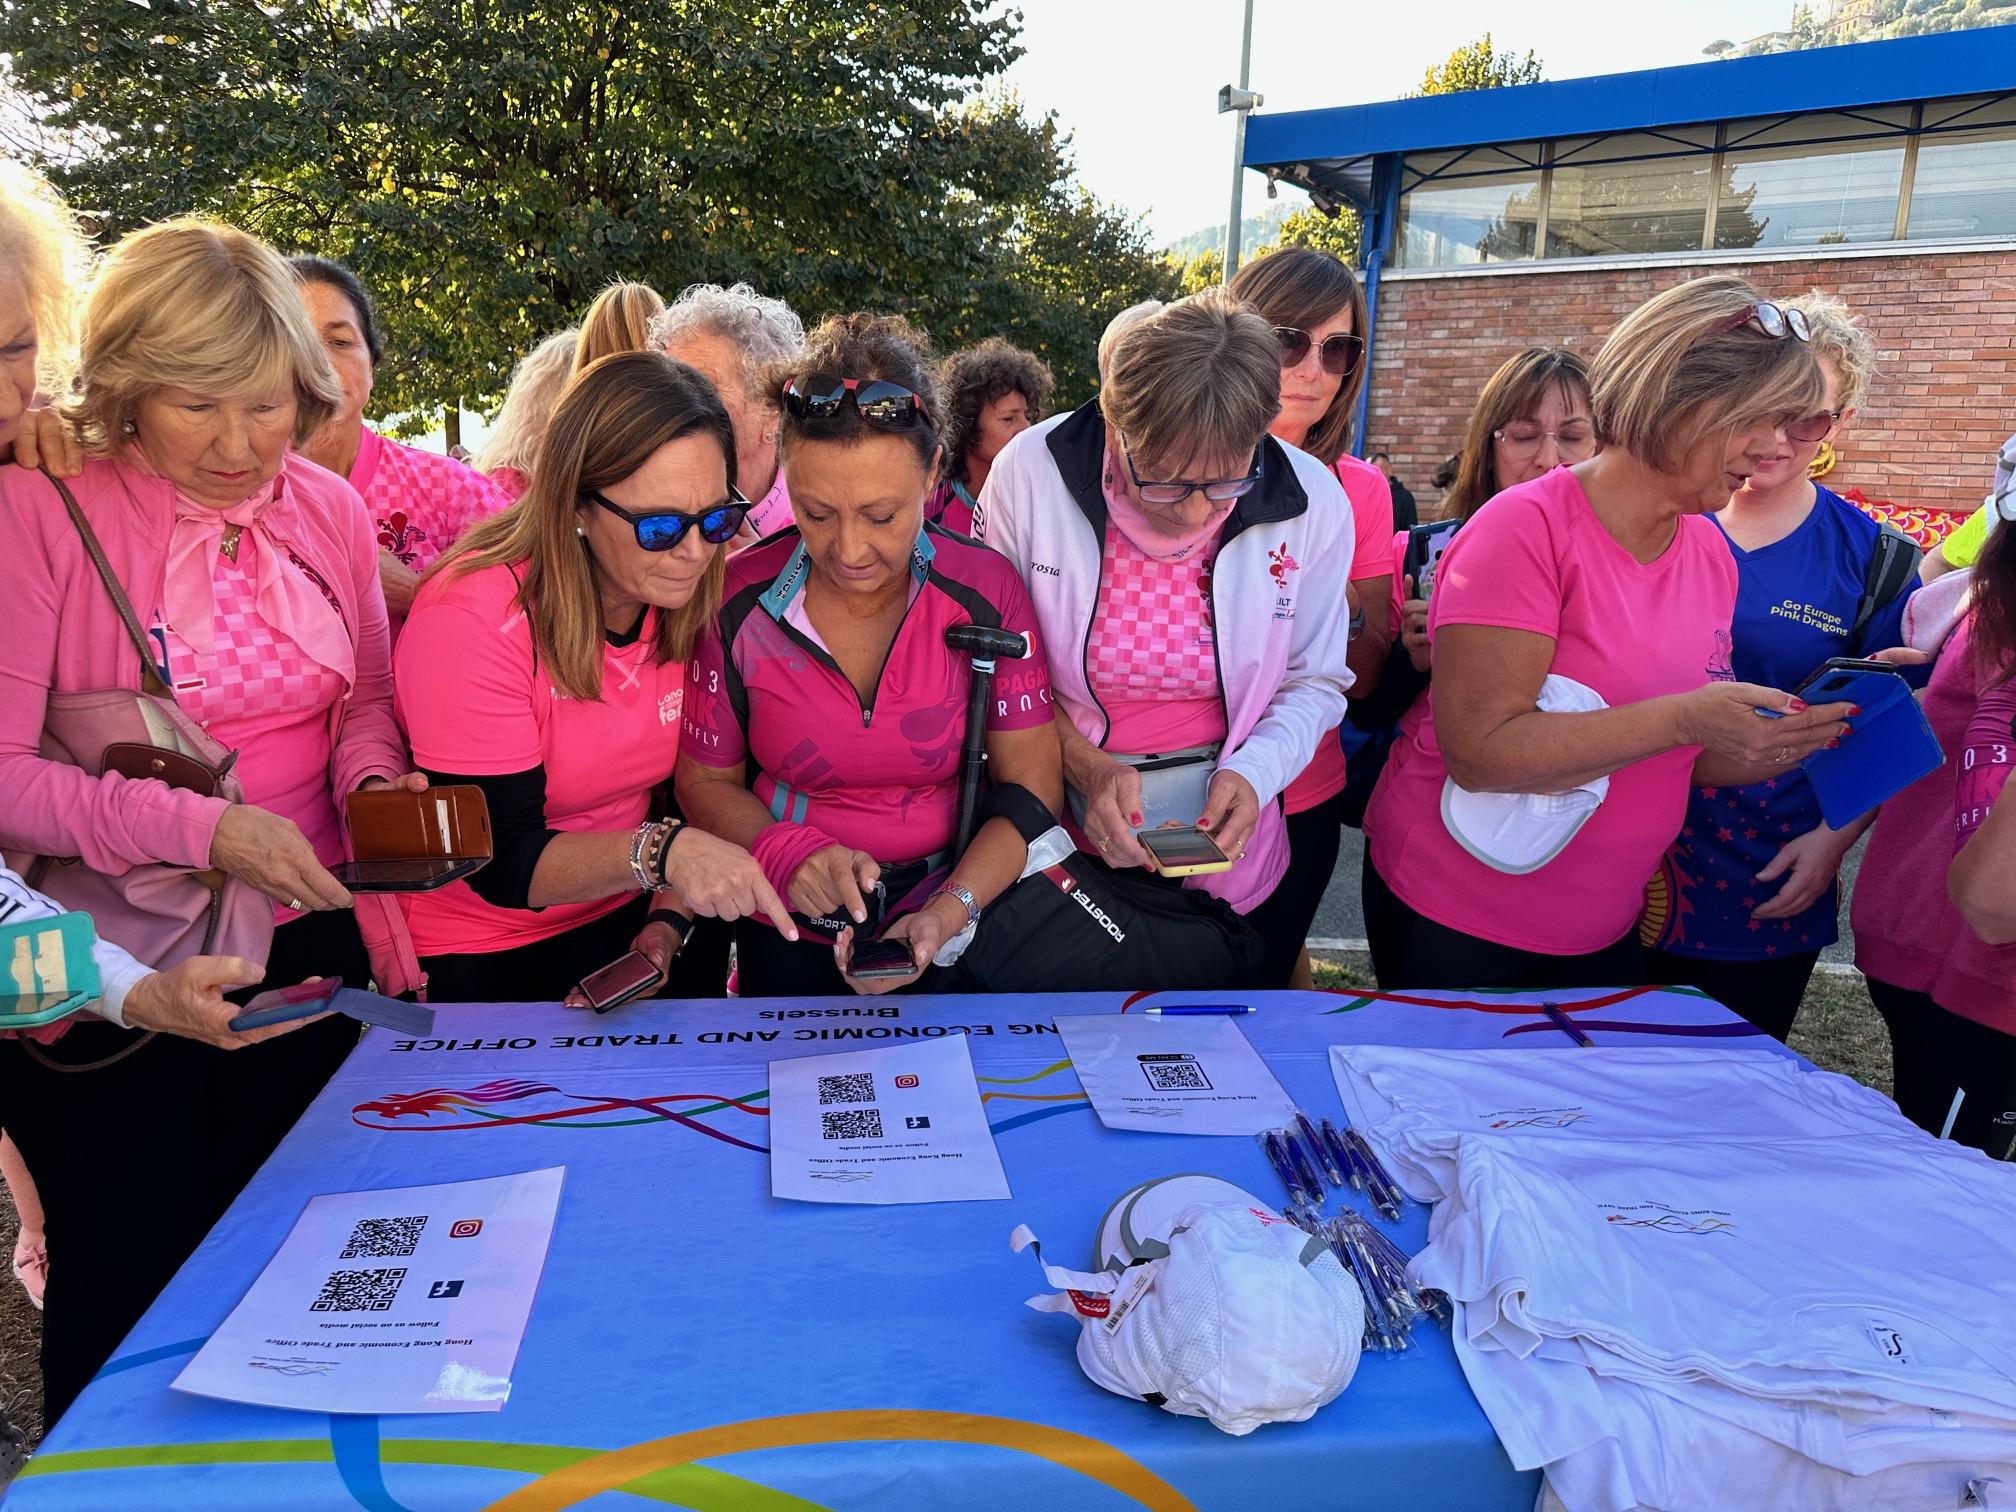 The Pink Butterfly Dragon Boat Festival, sponsored by the Hong Kong Economic and Trade Office in Brussels for the first time, were held at the Castel Gandolfo Olympic lake near Rome in Italy on October 14 (Rome time). Photo shows enthusiastic participants and visitors at the Pink Butterfly Dragon Boat Festival visiting the Hong Kong stand where they could learn more about Hong Kong’s attractions and latest developments.